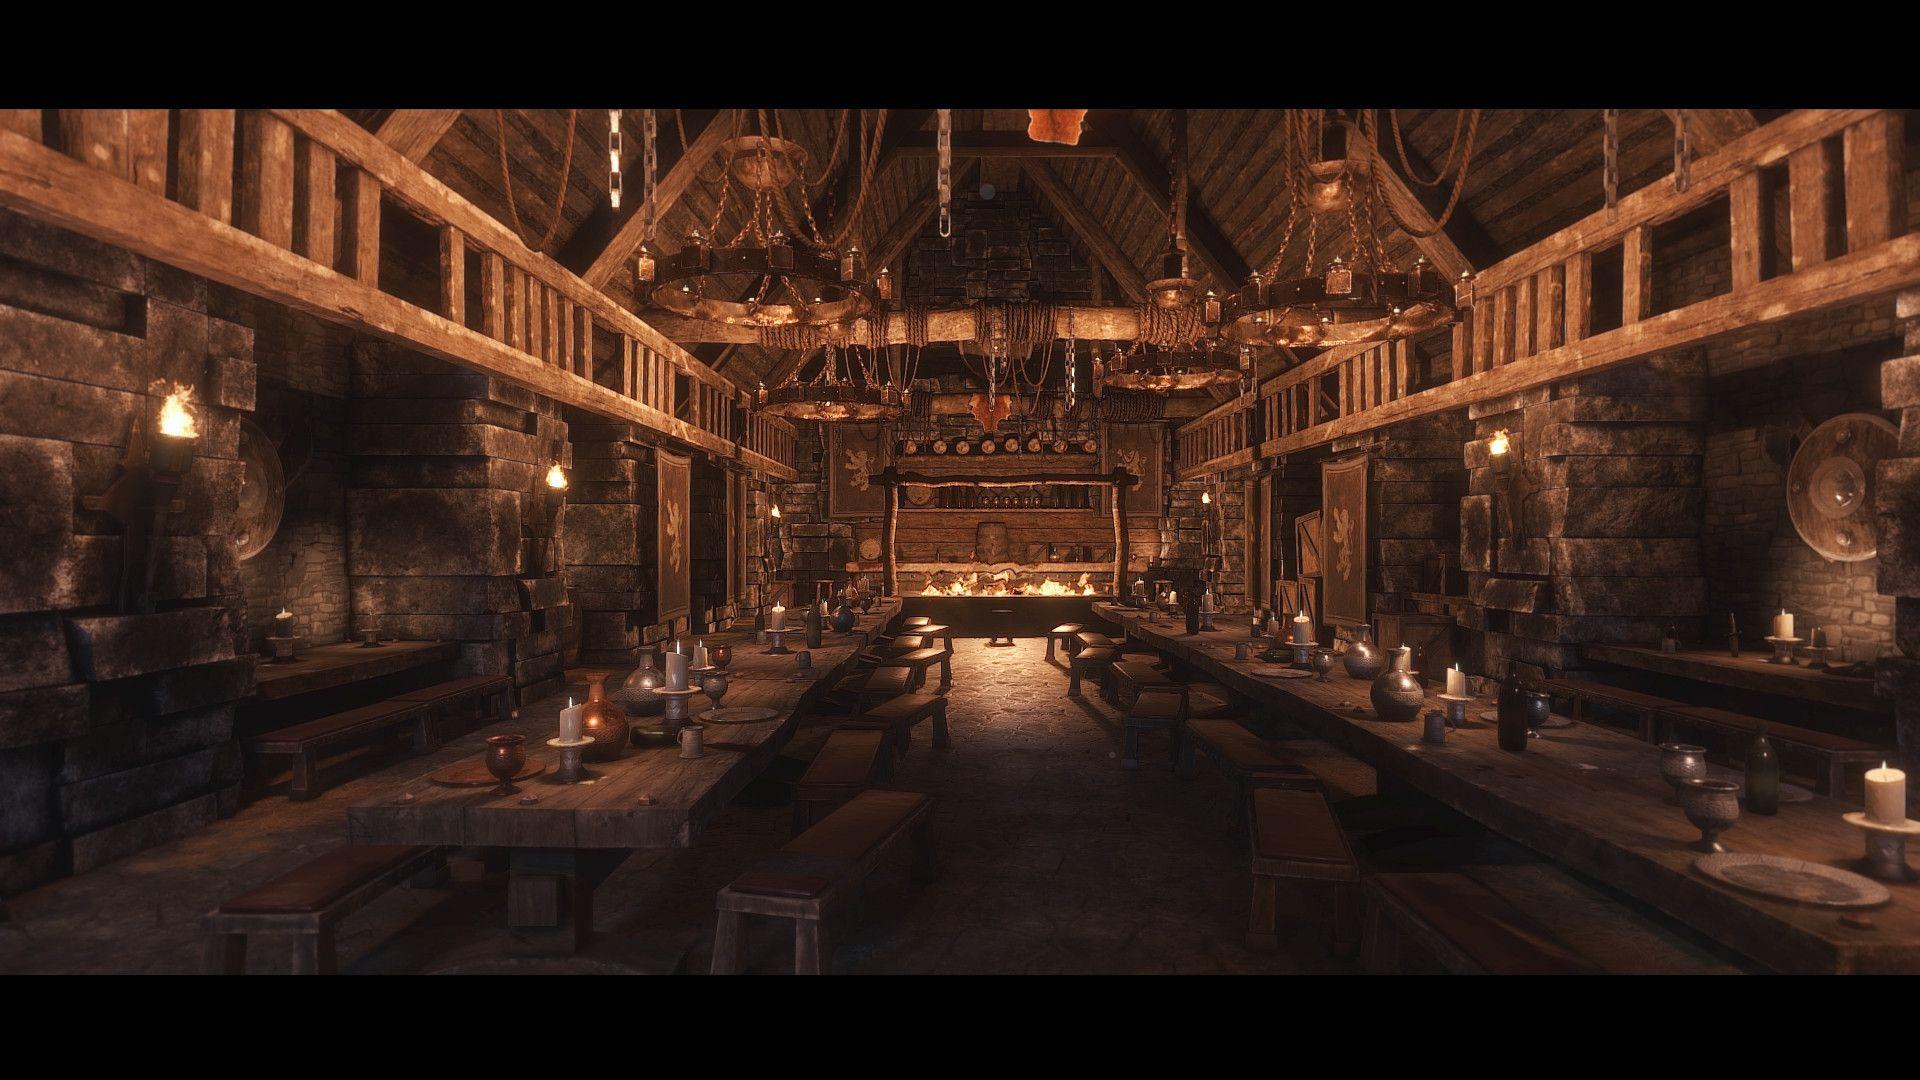 D&D Wallpaper Tavern / The watchful blade, a tavern in the shrouded